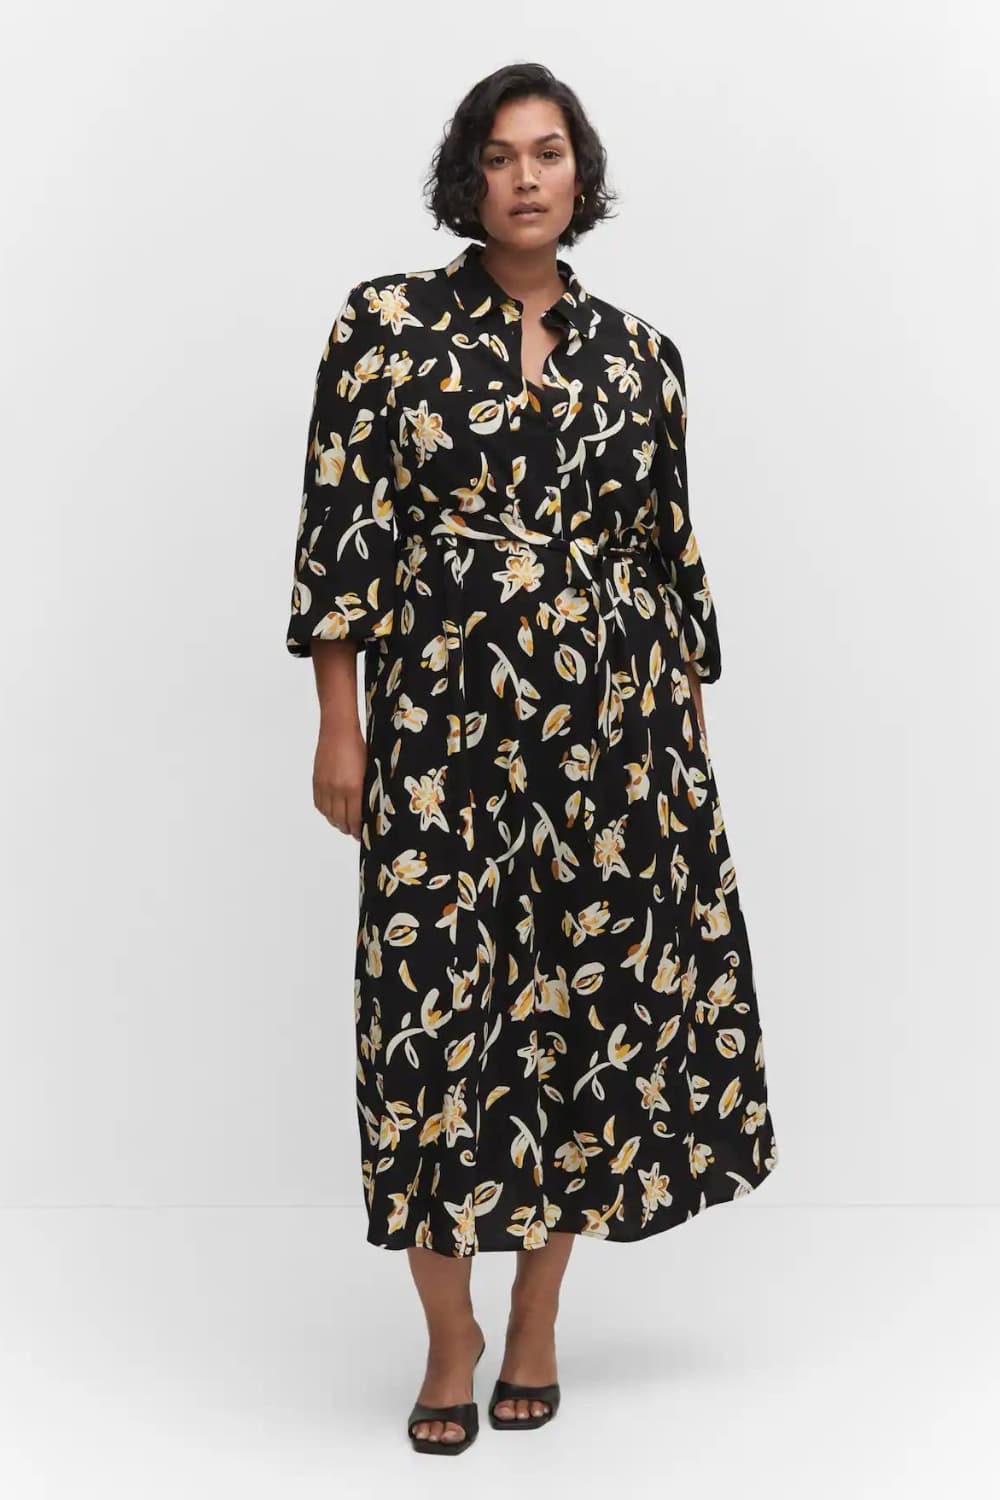 Printed shirt dress work dinner party outfit